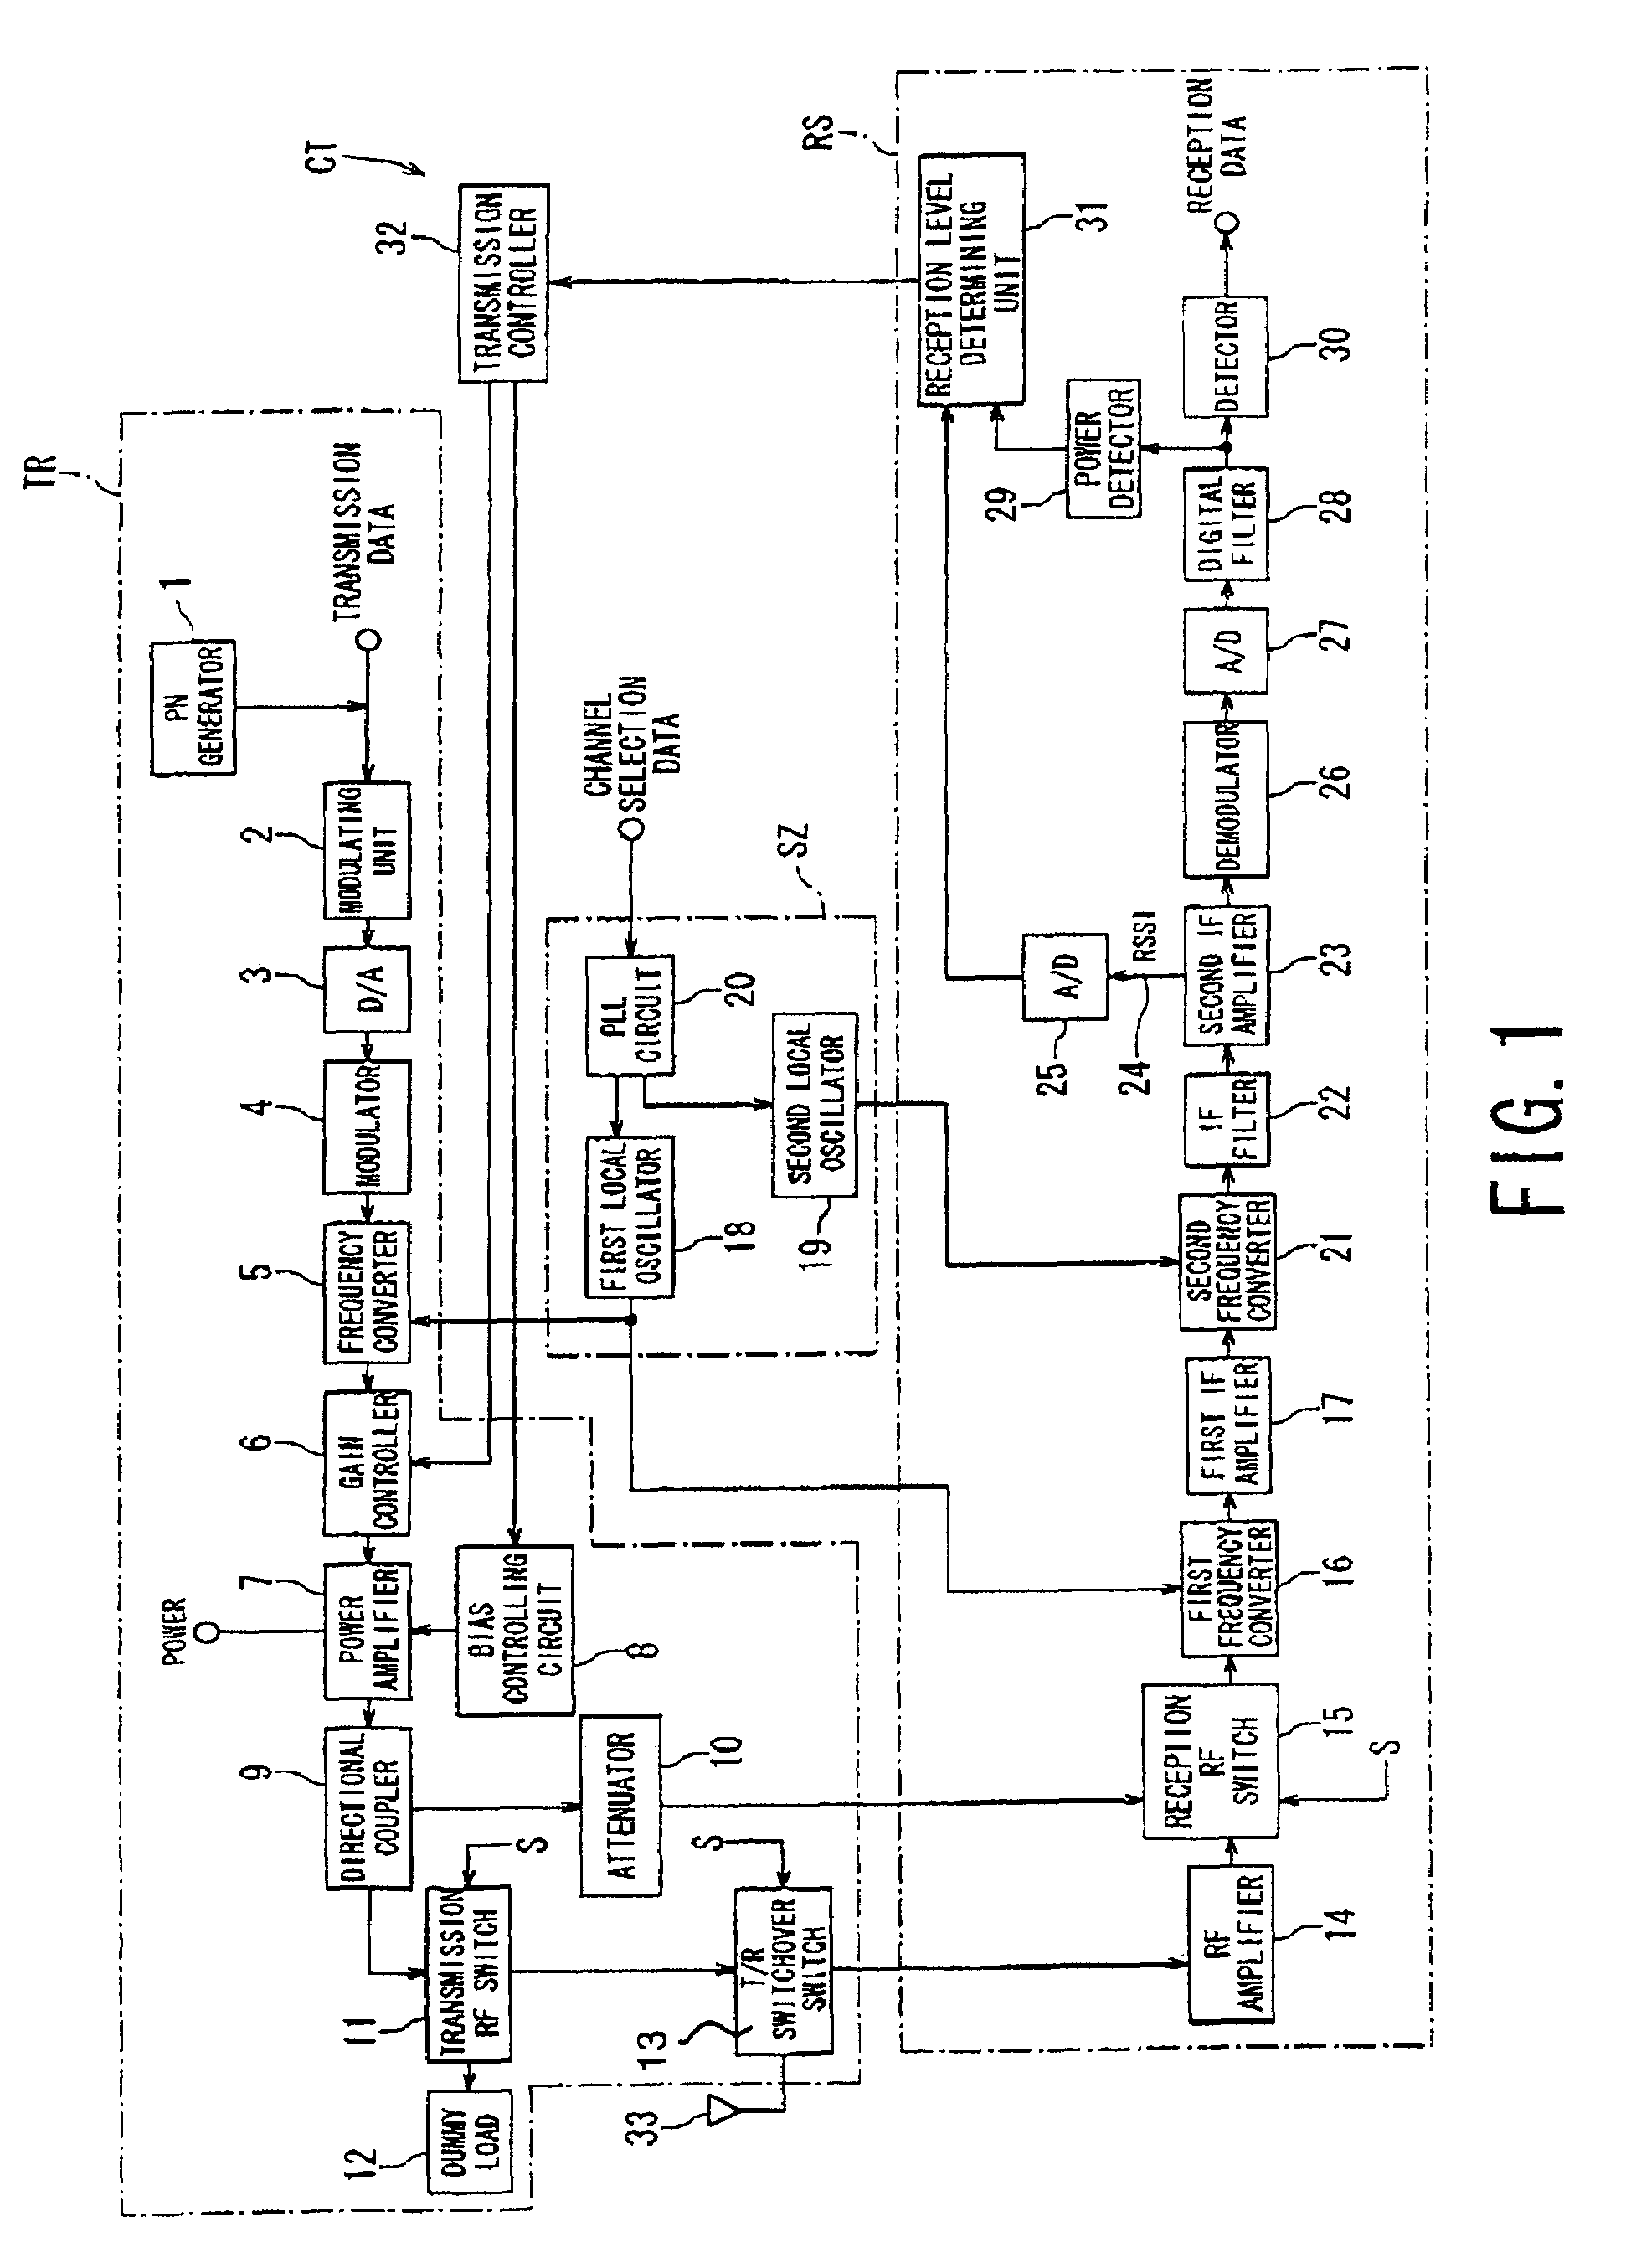 Time division multiplexing radio system for controlling transmission power